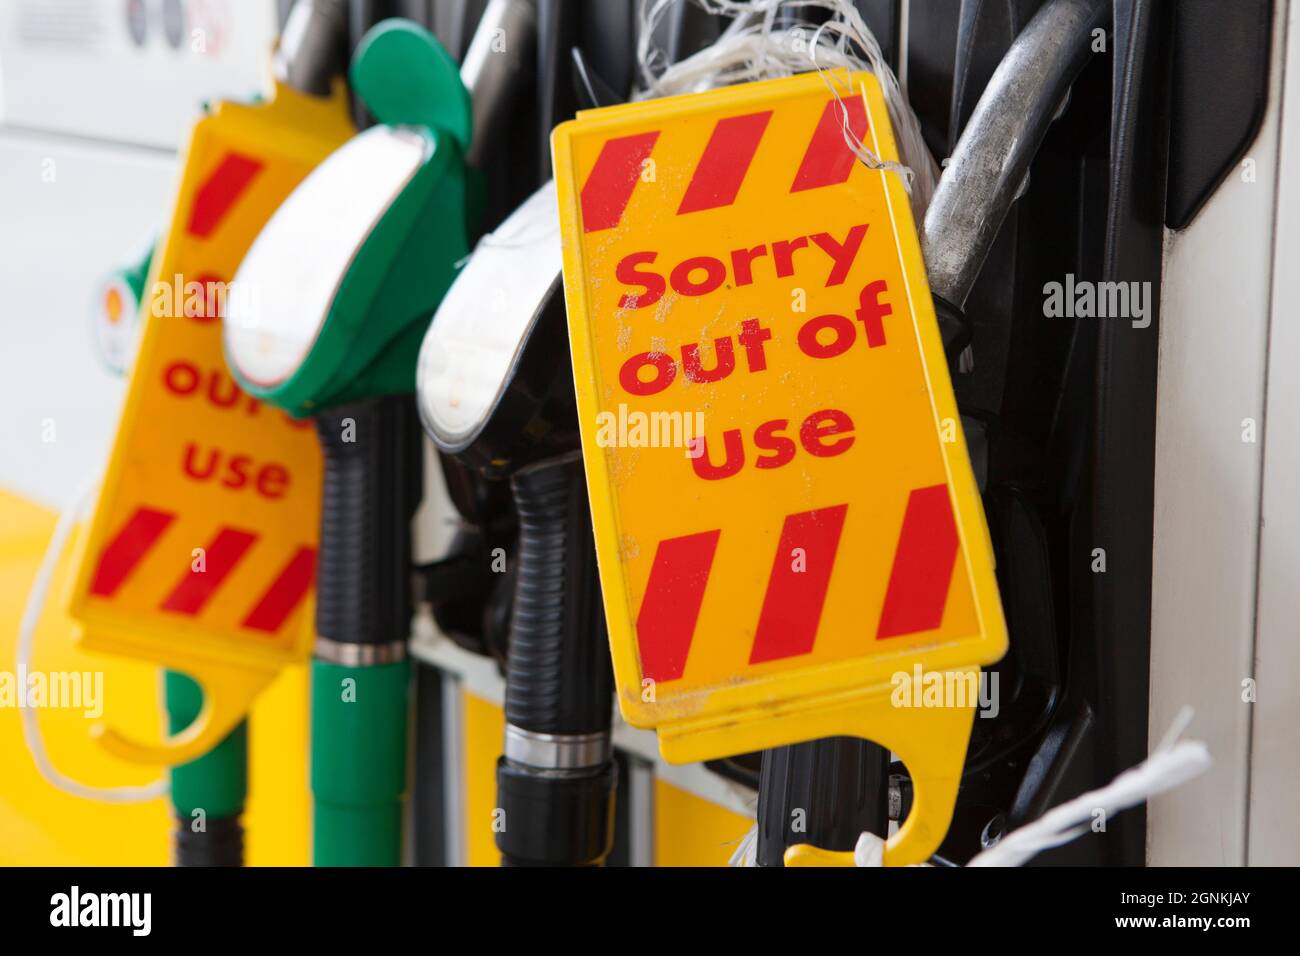 London, UK. 26th Sep, 2021. On Balham Hill in south London a Shell Garage is completely out of all types of fuel. The pumps are labelled as out of use and traffic cones have hand-written signs saying 'No Fuel Sorry'. While there is not an absolute fuel shortage in the country, the lack of delivery drivers means that some chains have run short and the subsequent panic buying has exacerbated the situation. Credit: Anna Watson/Alamy Live News Stock Photo